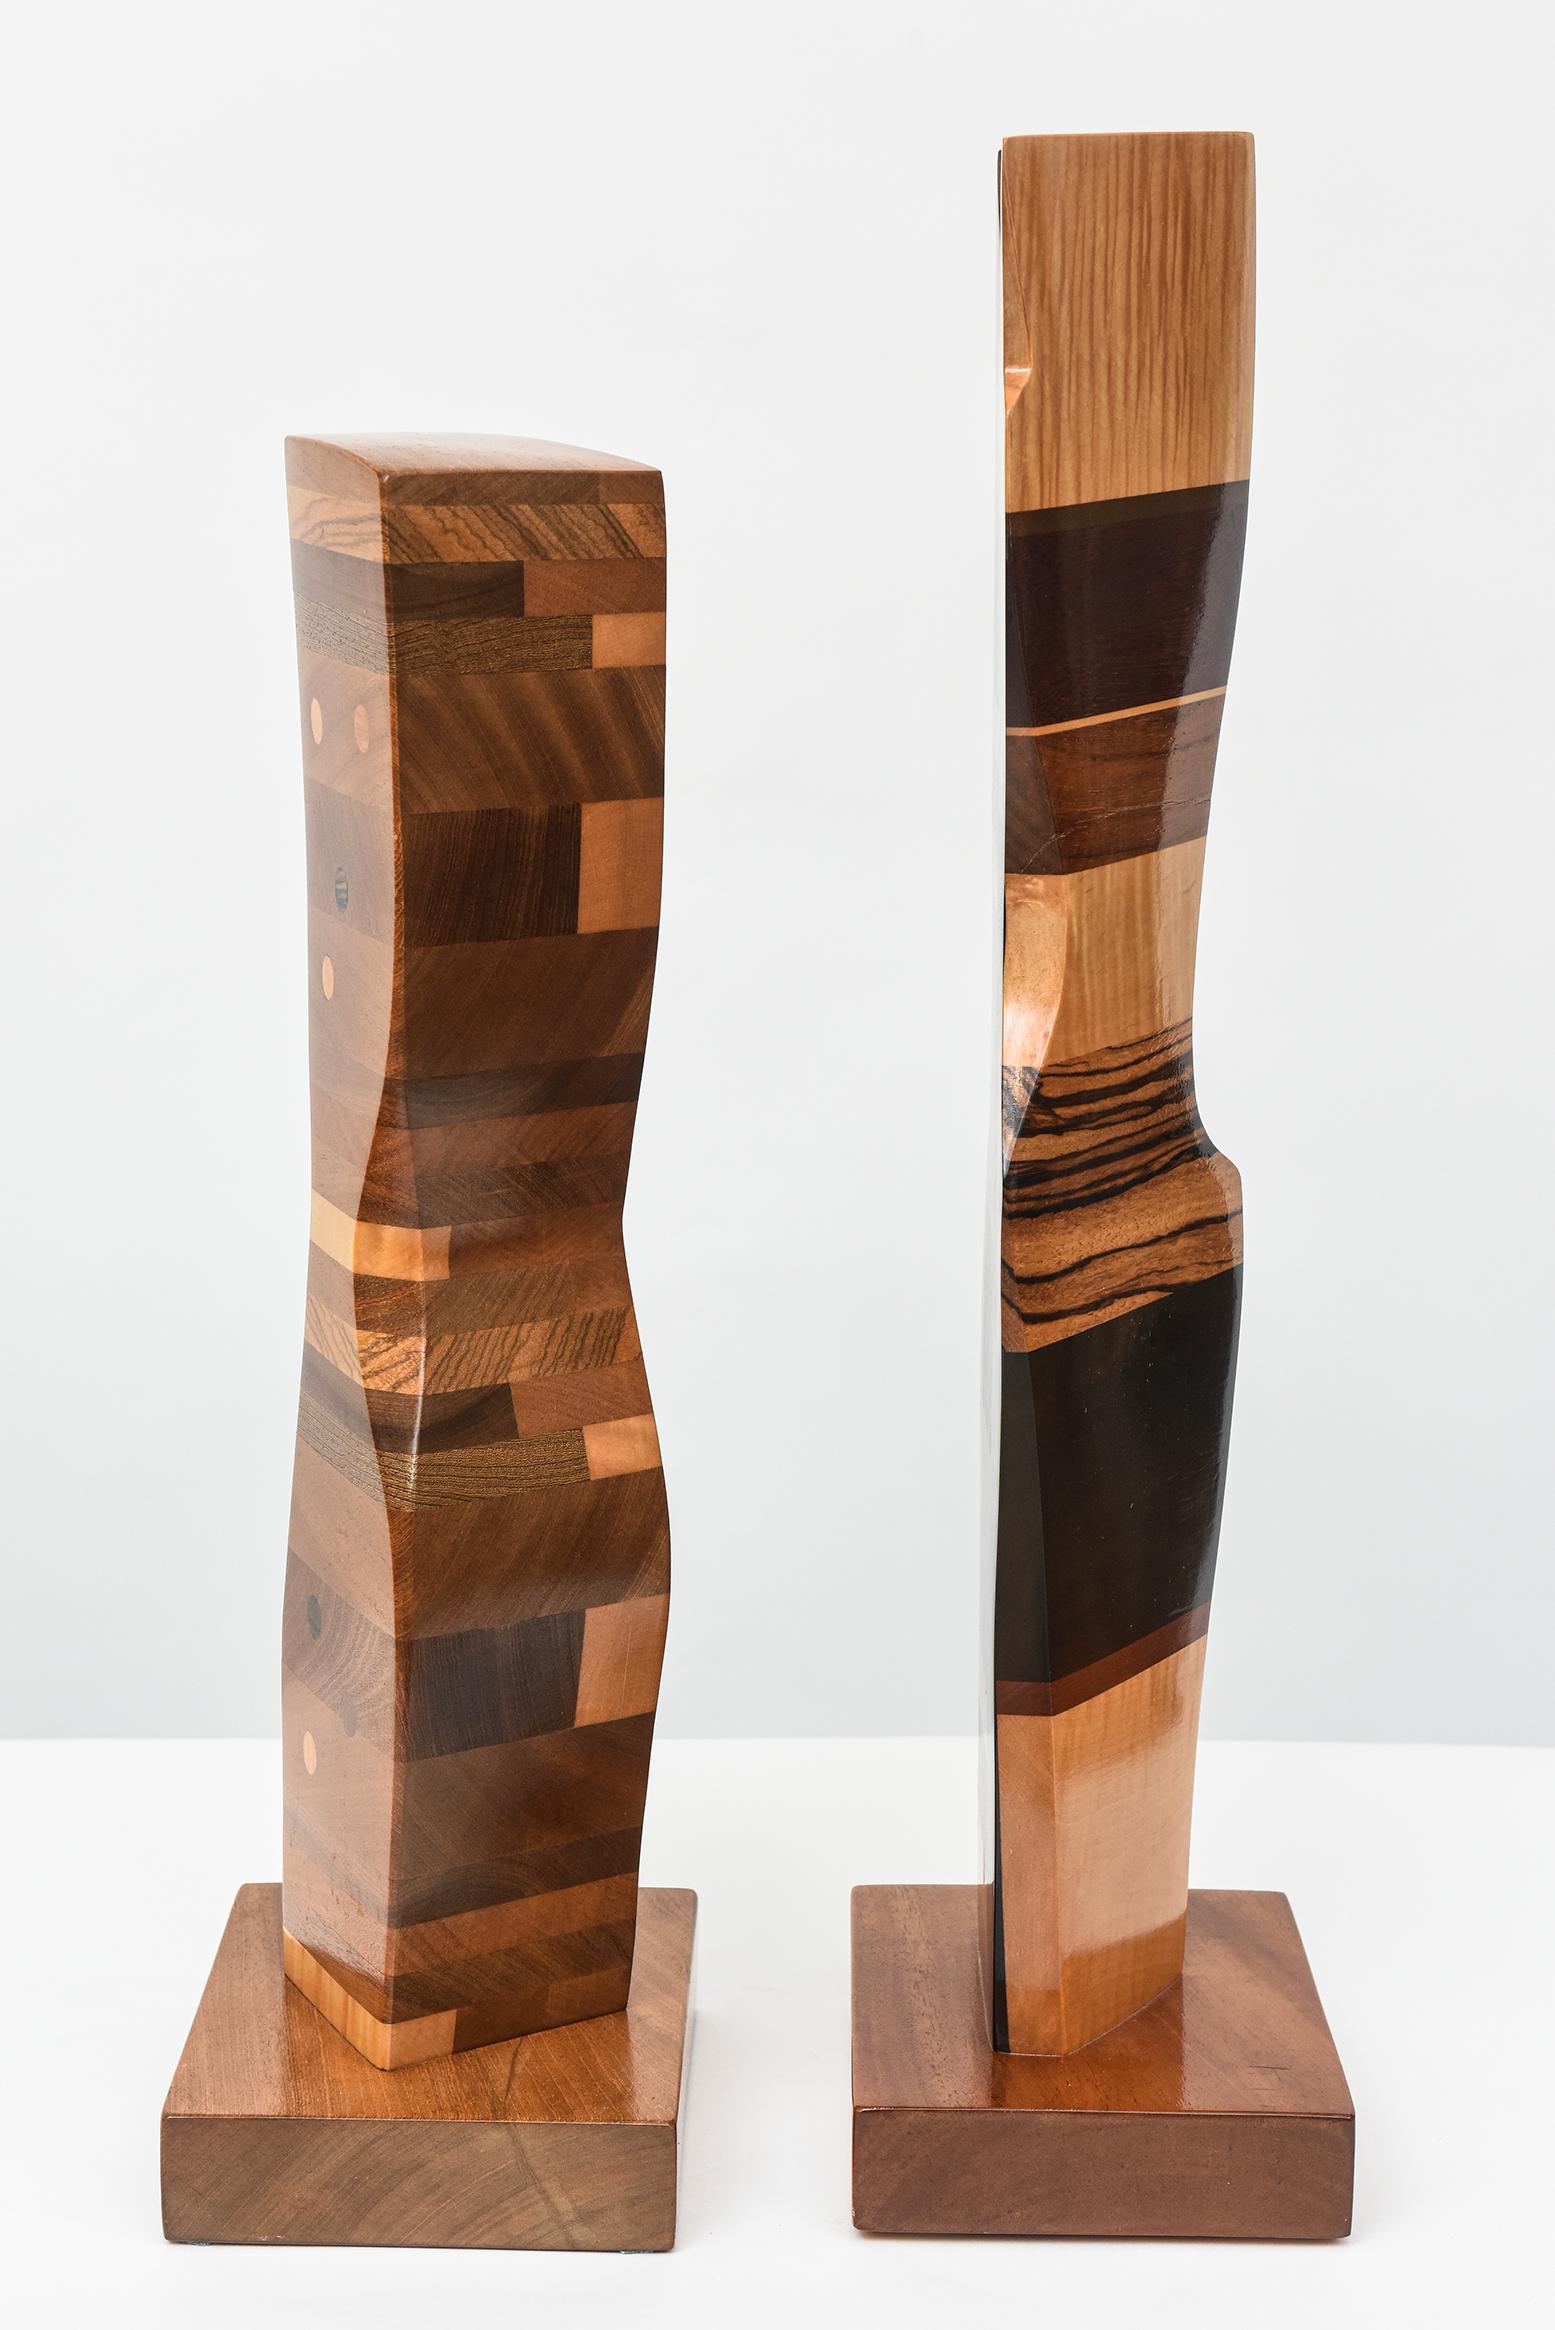 Hand-Carved Two Modern Abstract Mixed Wood Studio Sculptures by Paul LaMontagne, C. 1980 For Sale